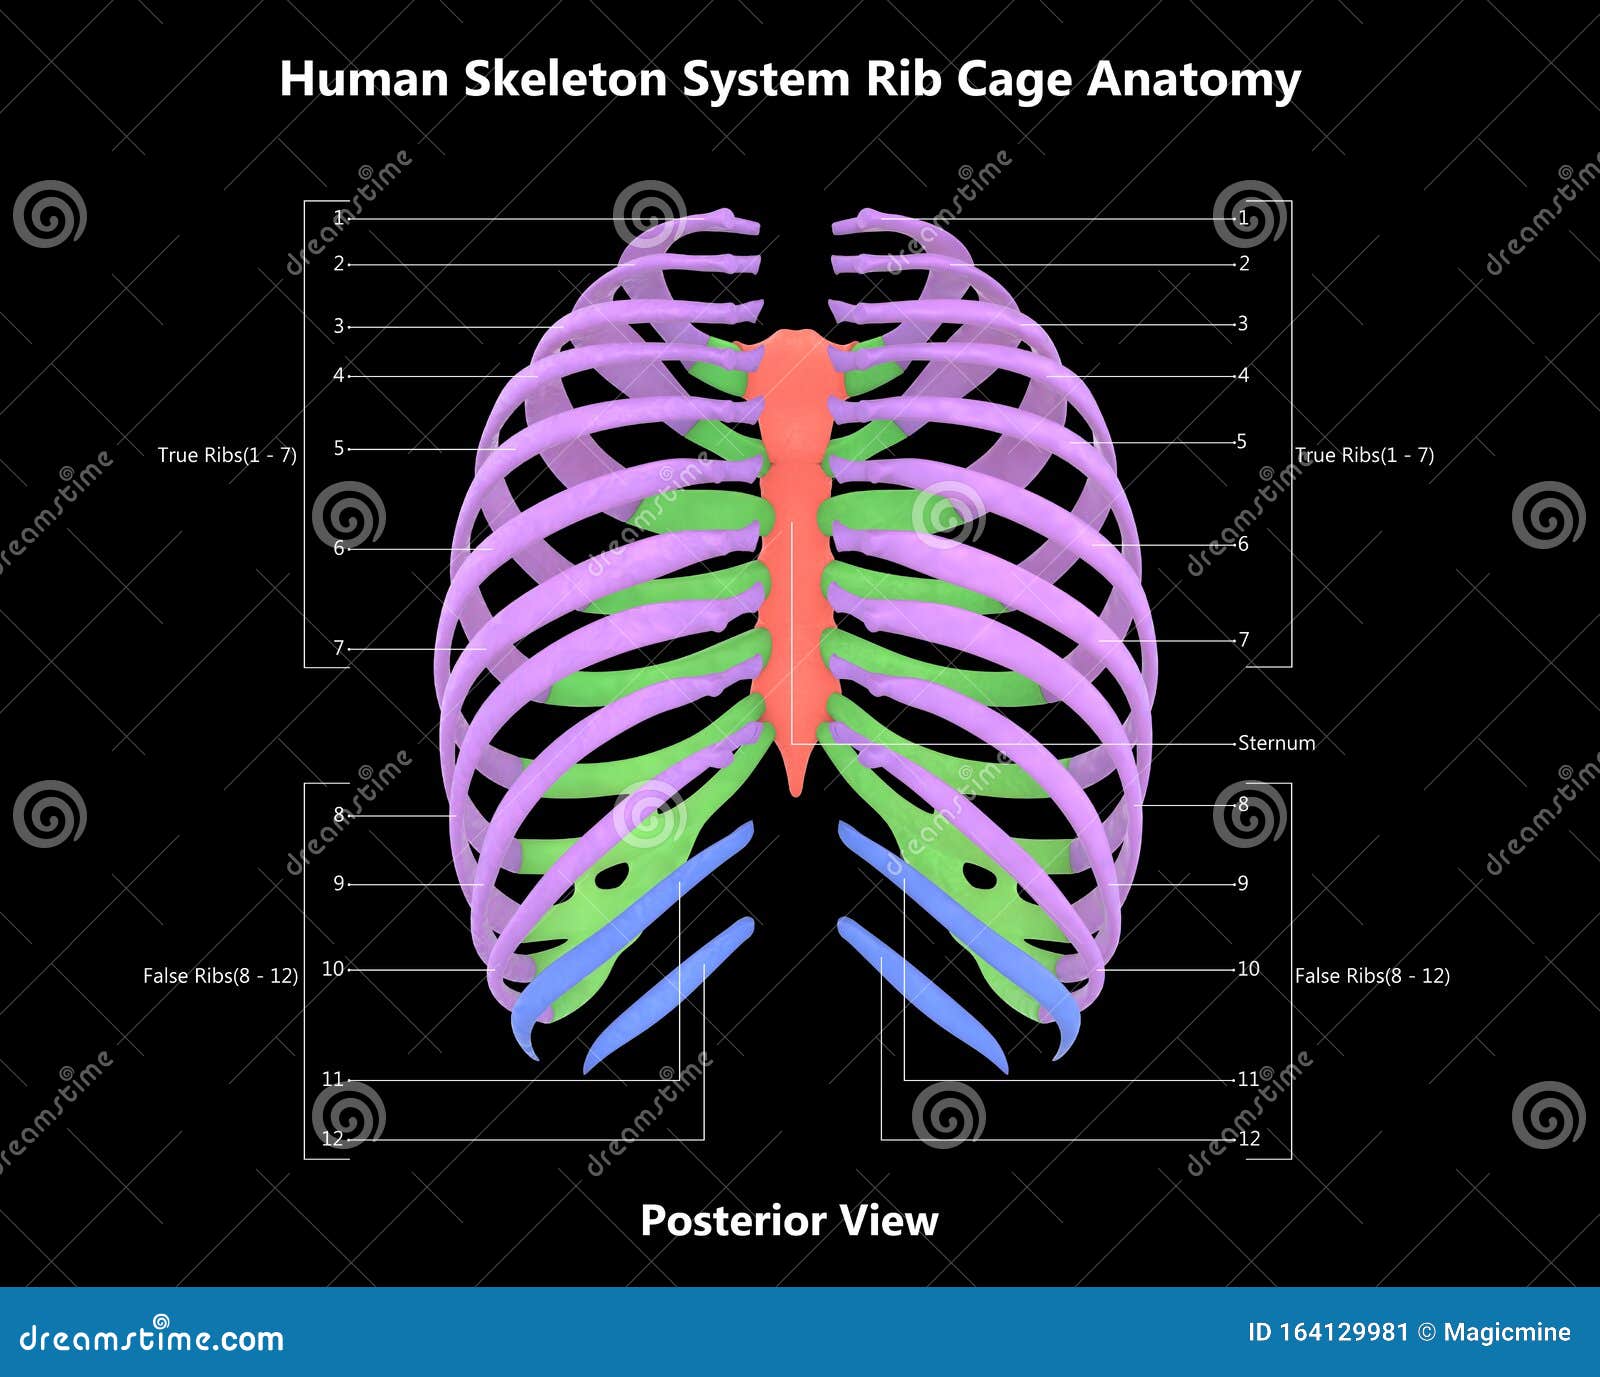 Rib Cage Of Human Skeleton System Anatomy With Detailed Labels Posterior View Stock Illustration Illustration Of Labels Inflammation 164129981